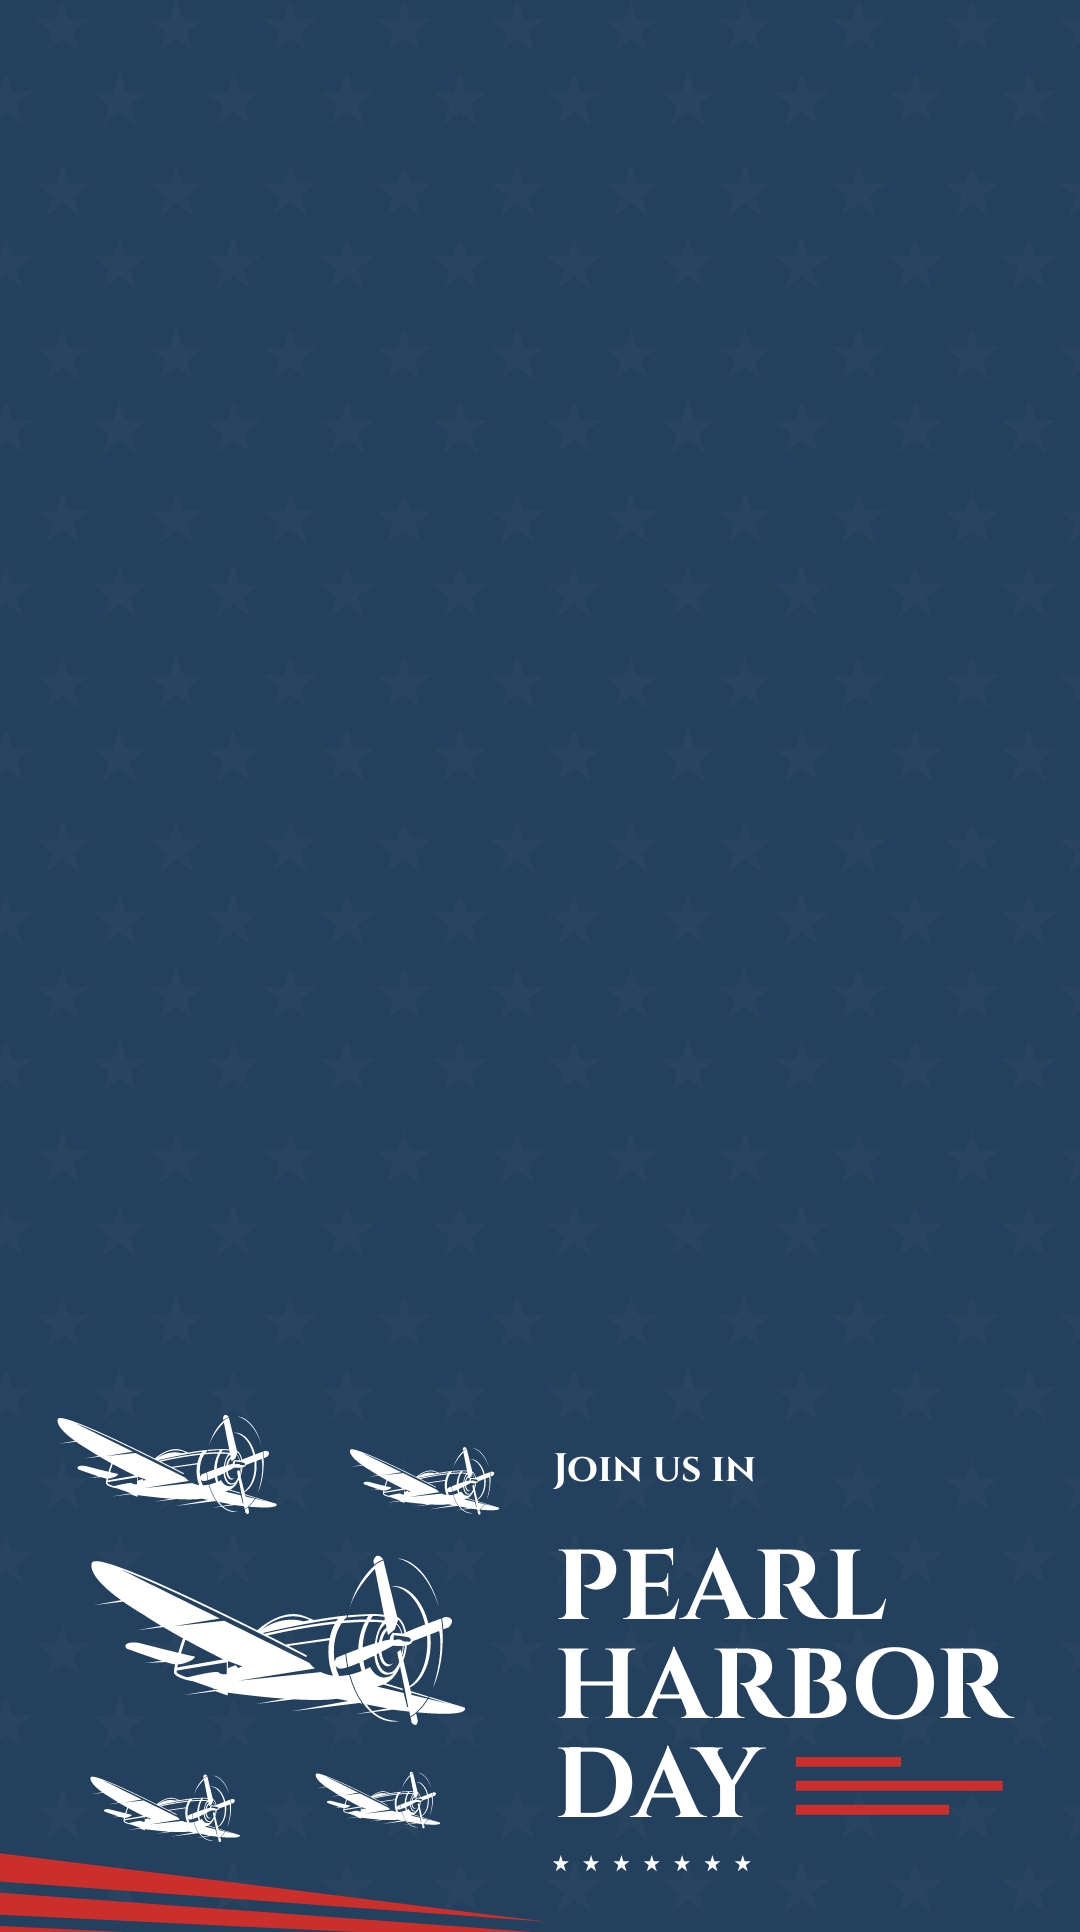 Pearl Harbor Day Event Snapchat Geofilter Template